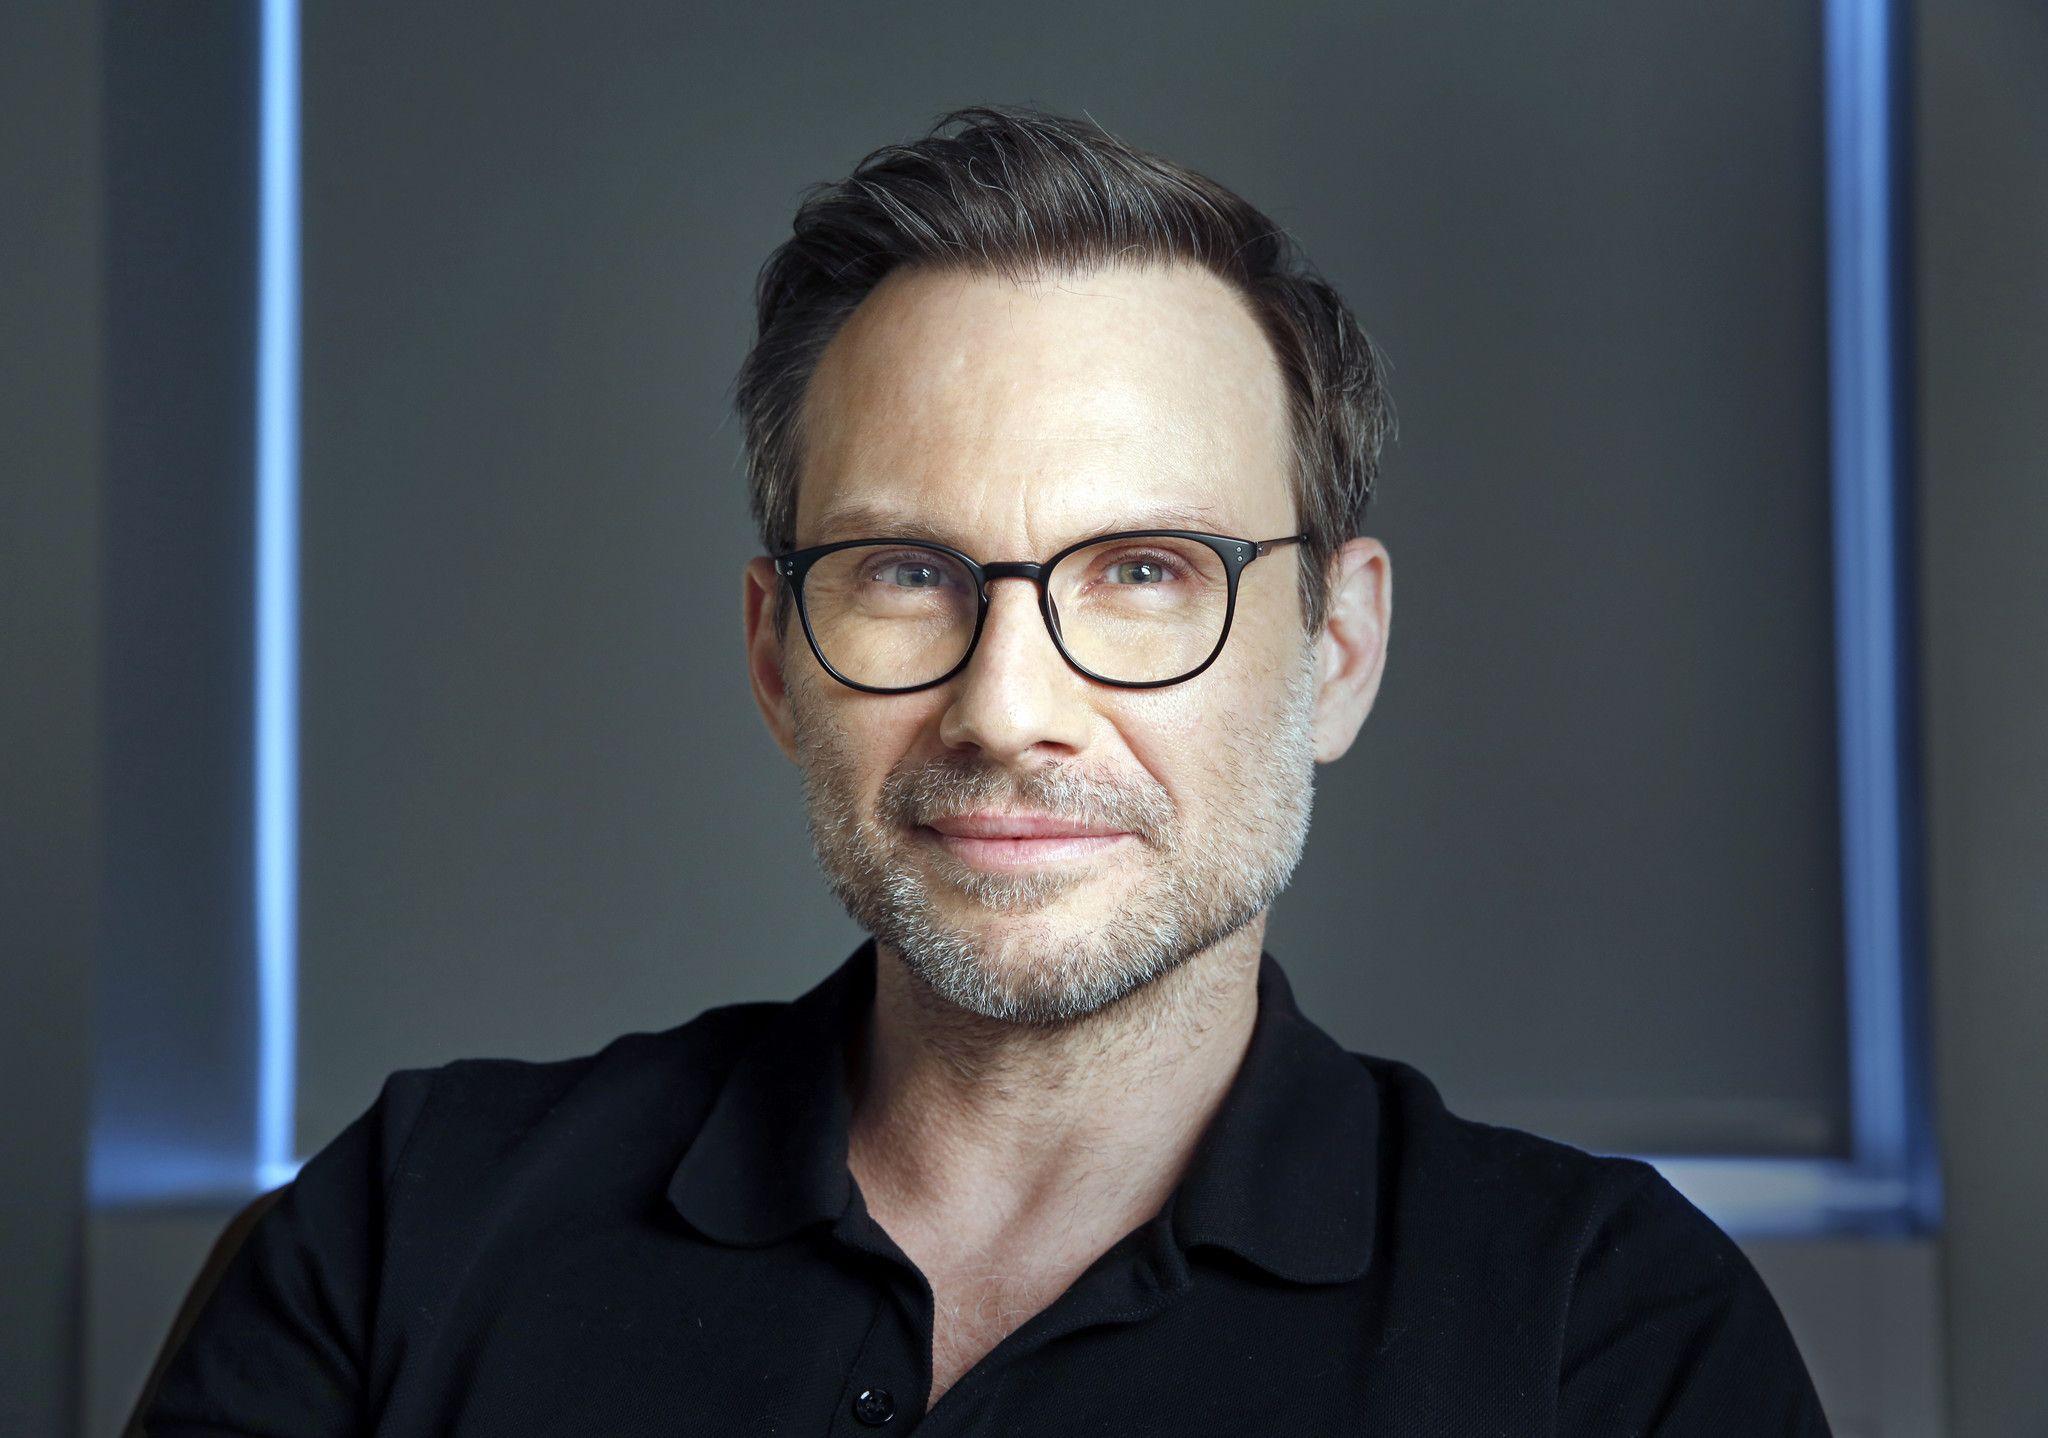 Mr. Robot's' Christian Slater hints at lots of 'chaotic energy'